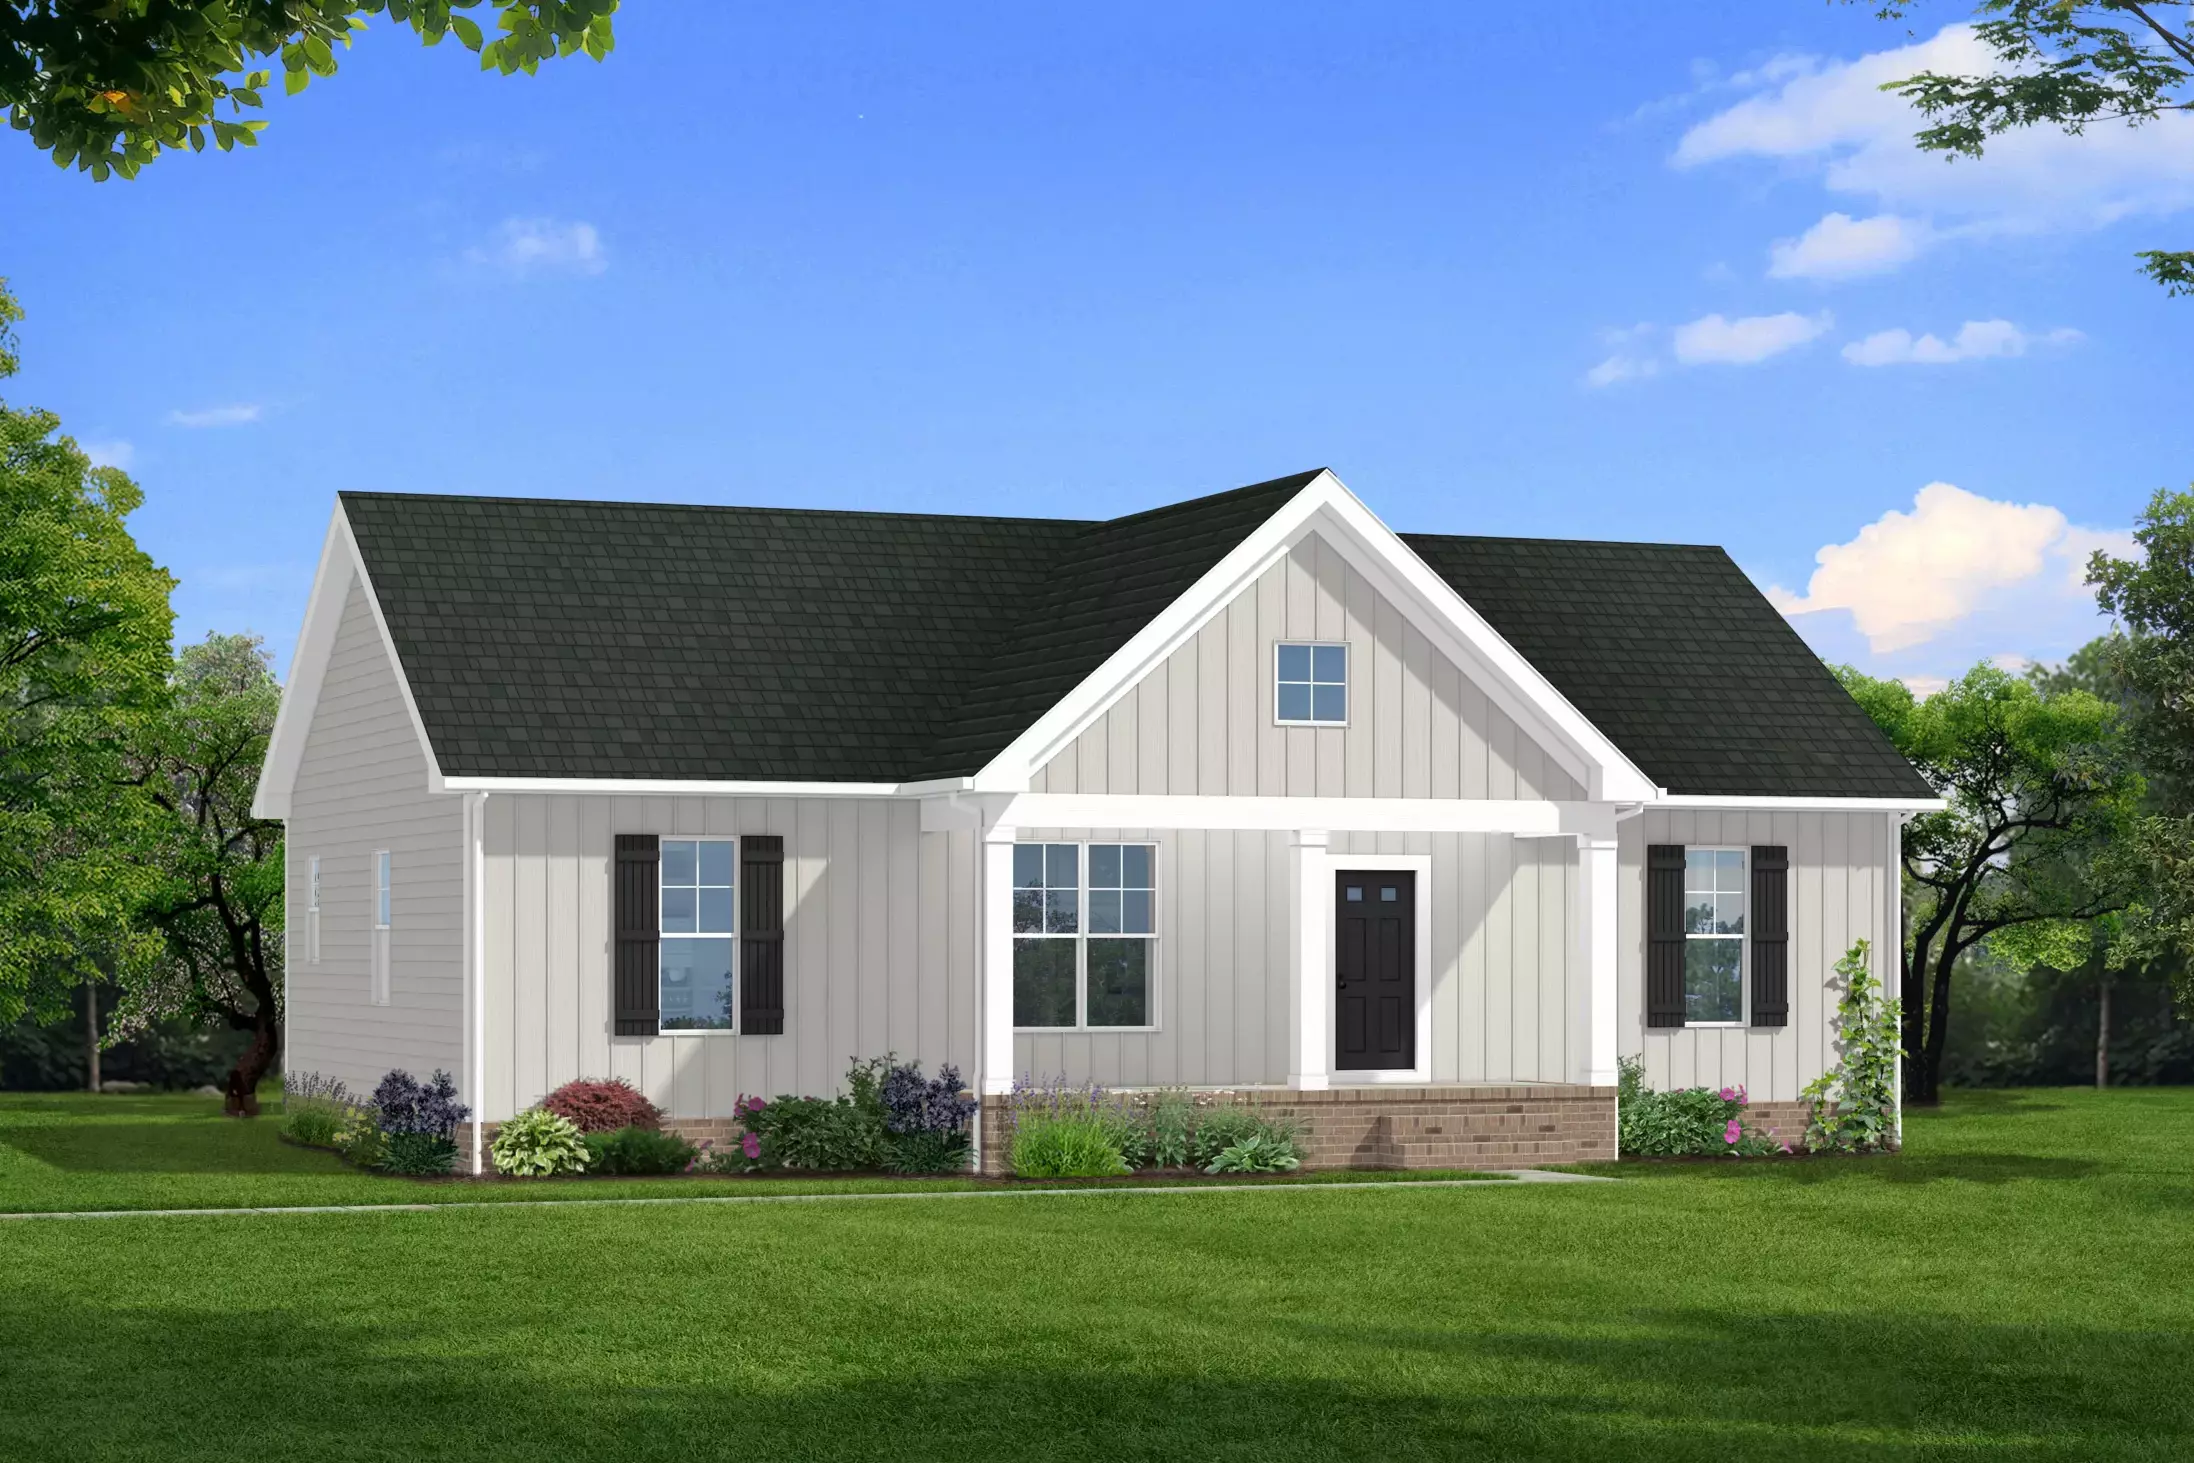 Rendering Rock Meadow Forest Lot 14 20230412 Scaled Uai 2194x1463, Rock River Homes